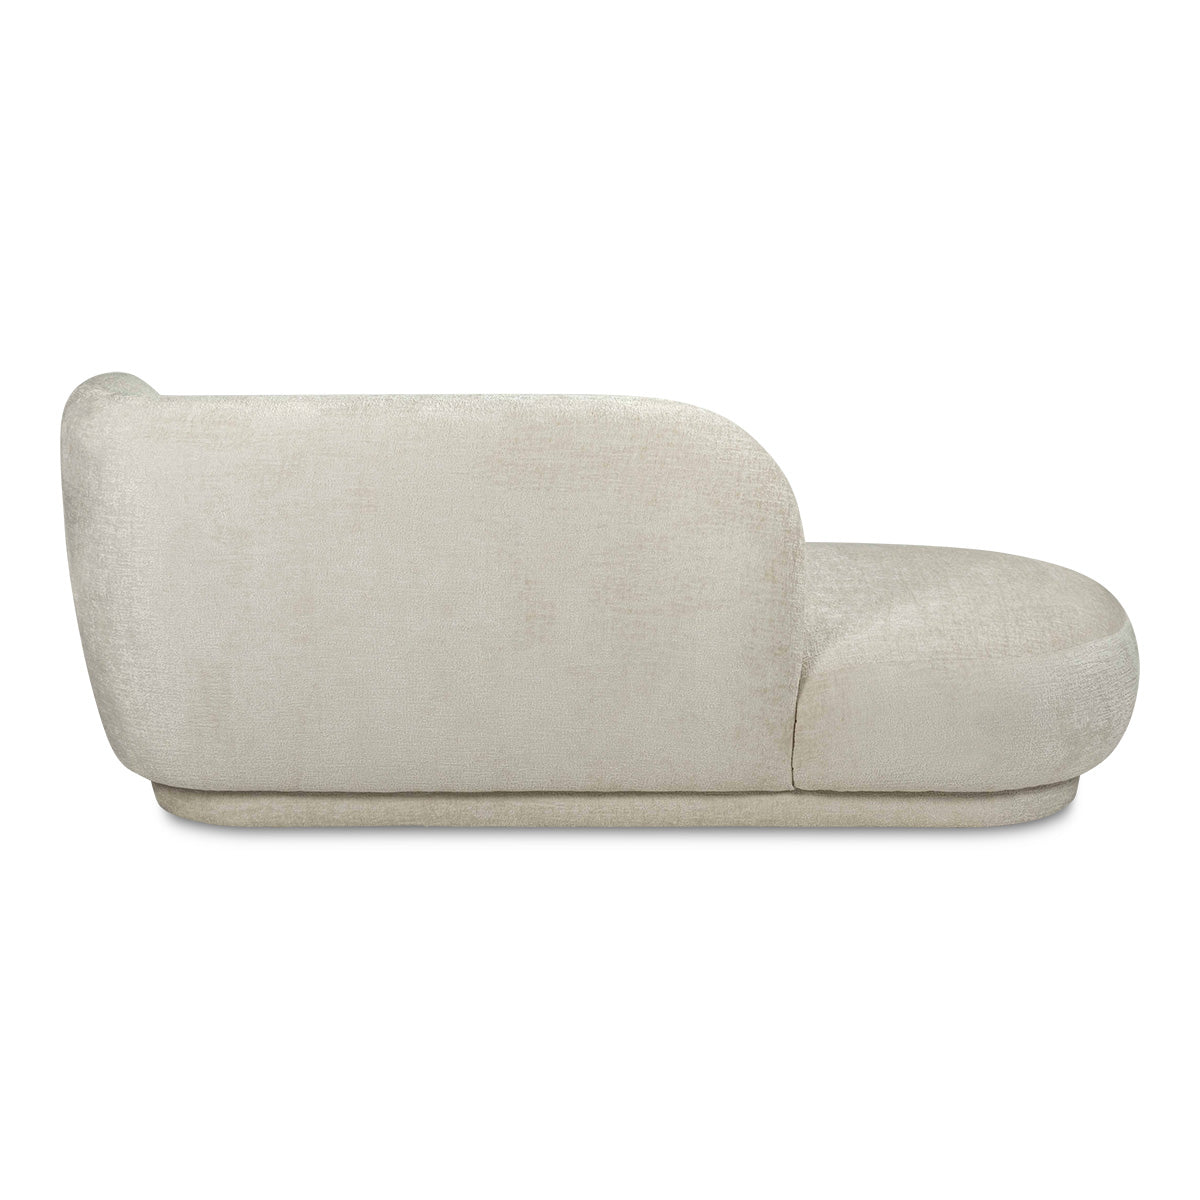 Palermo Chaise Sofa in Poodle